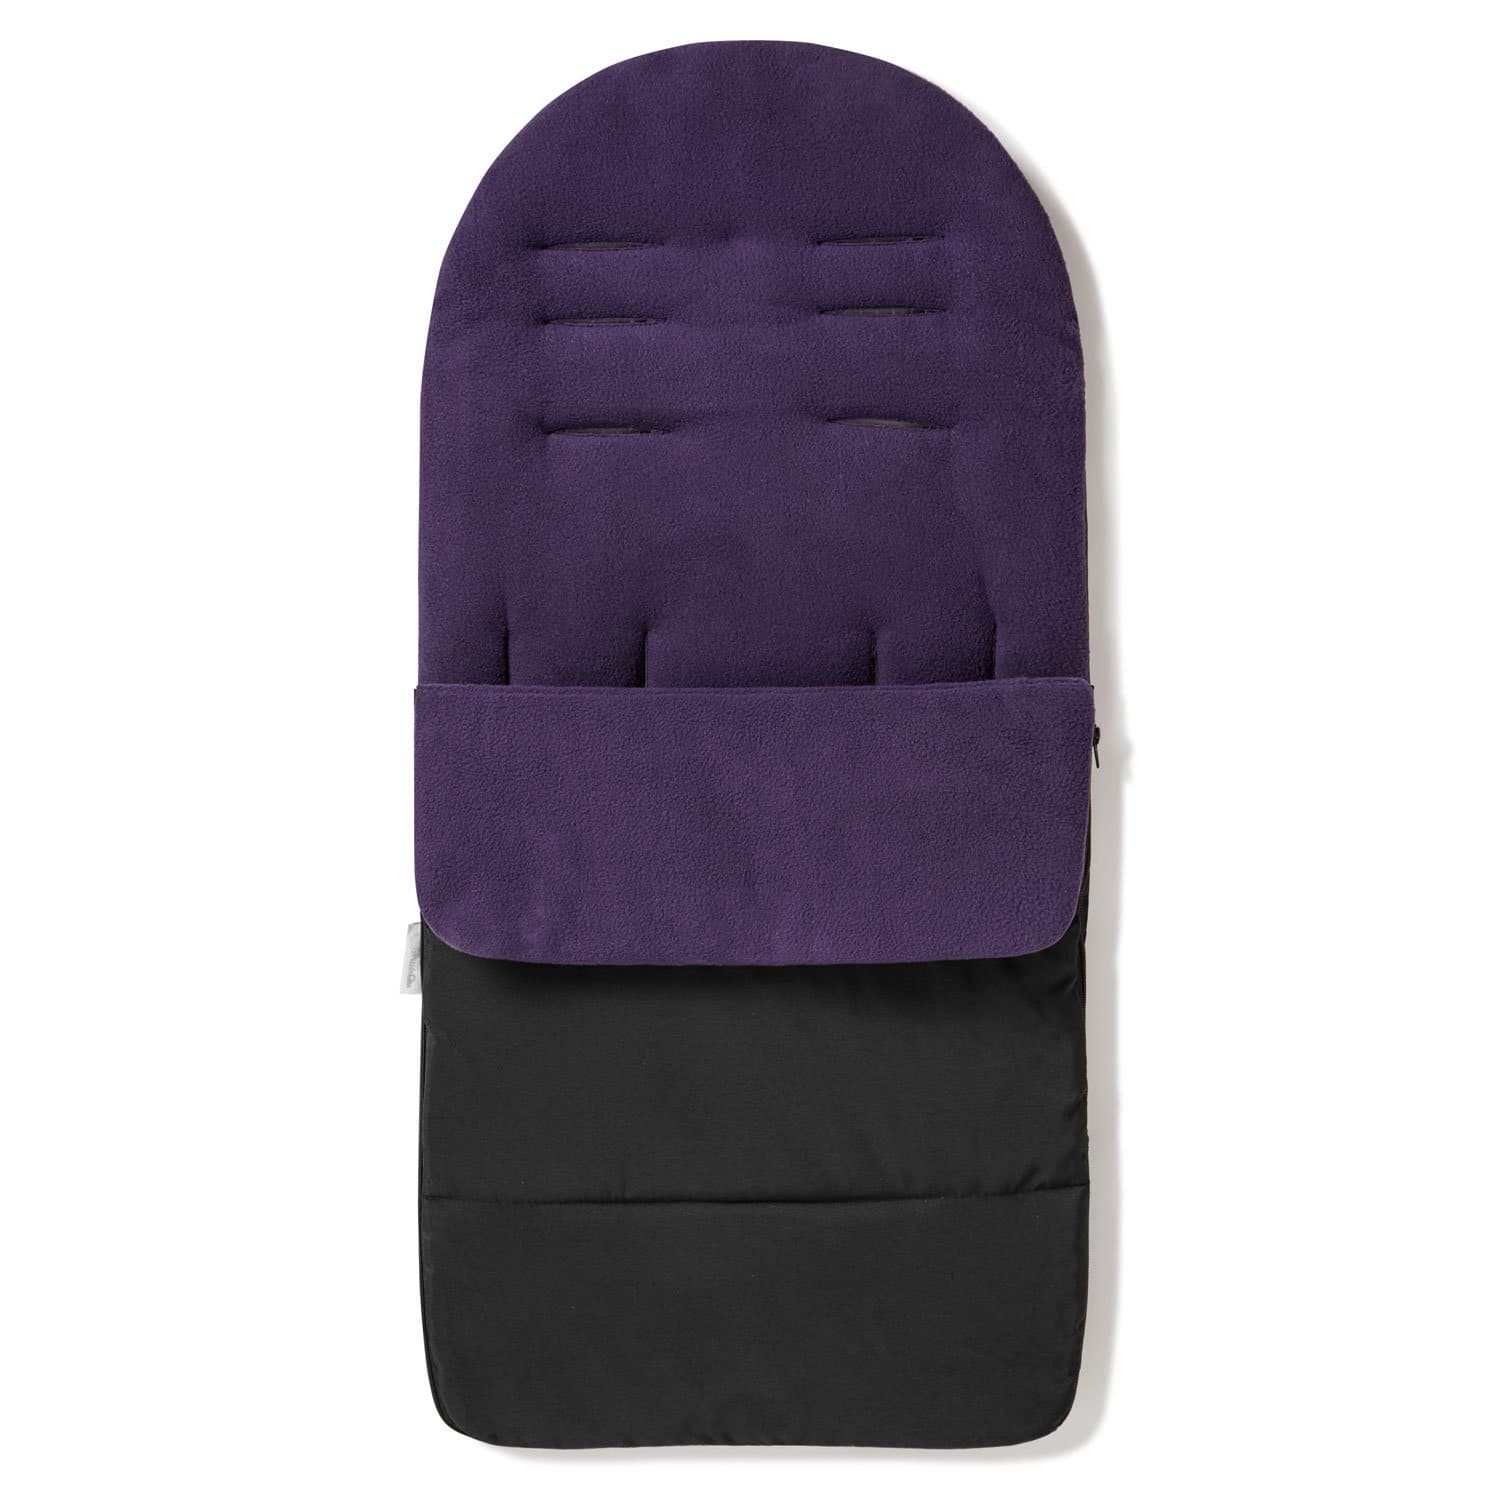 Premium Footmuff / Cosy Toes Compatible with Maxi Cosi - Plum Purple / Fits All Models | For Your Little One